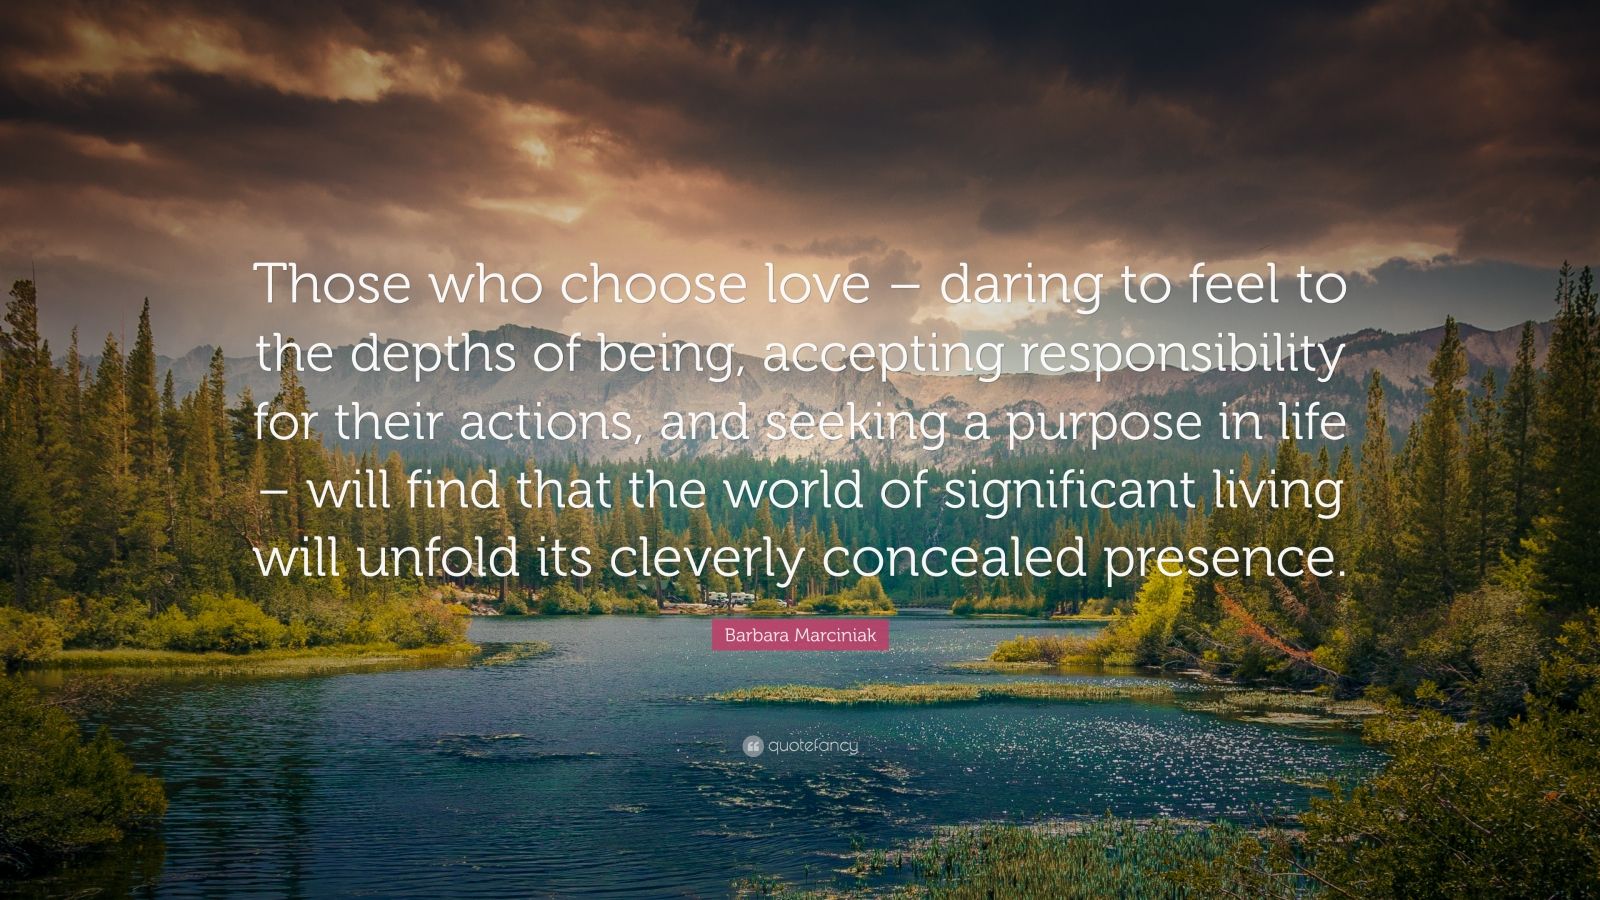 Barbara Marciniak Quote: “Those who choose love – daring to feel to the